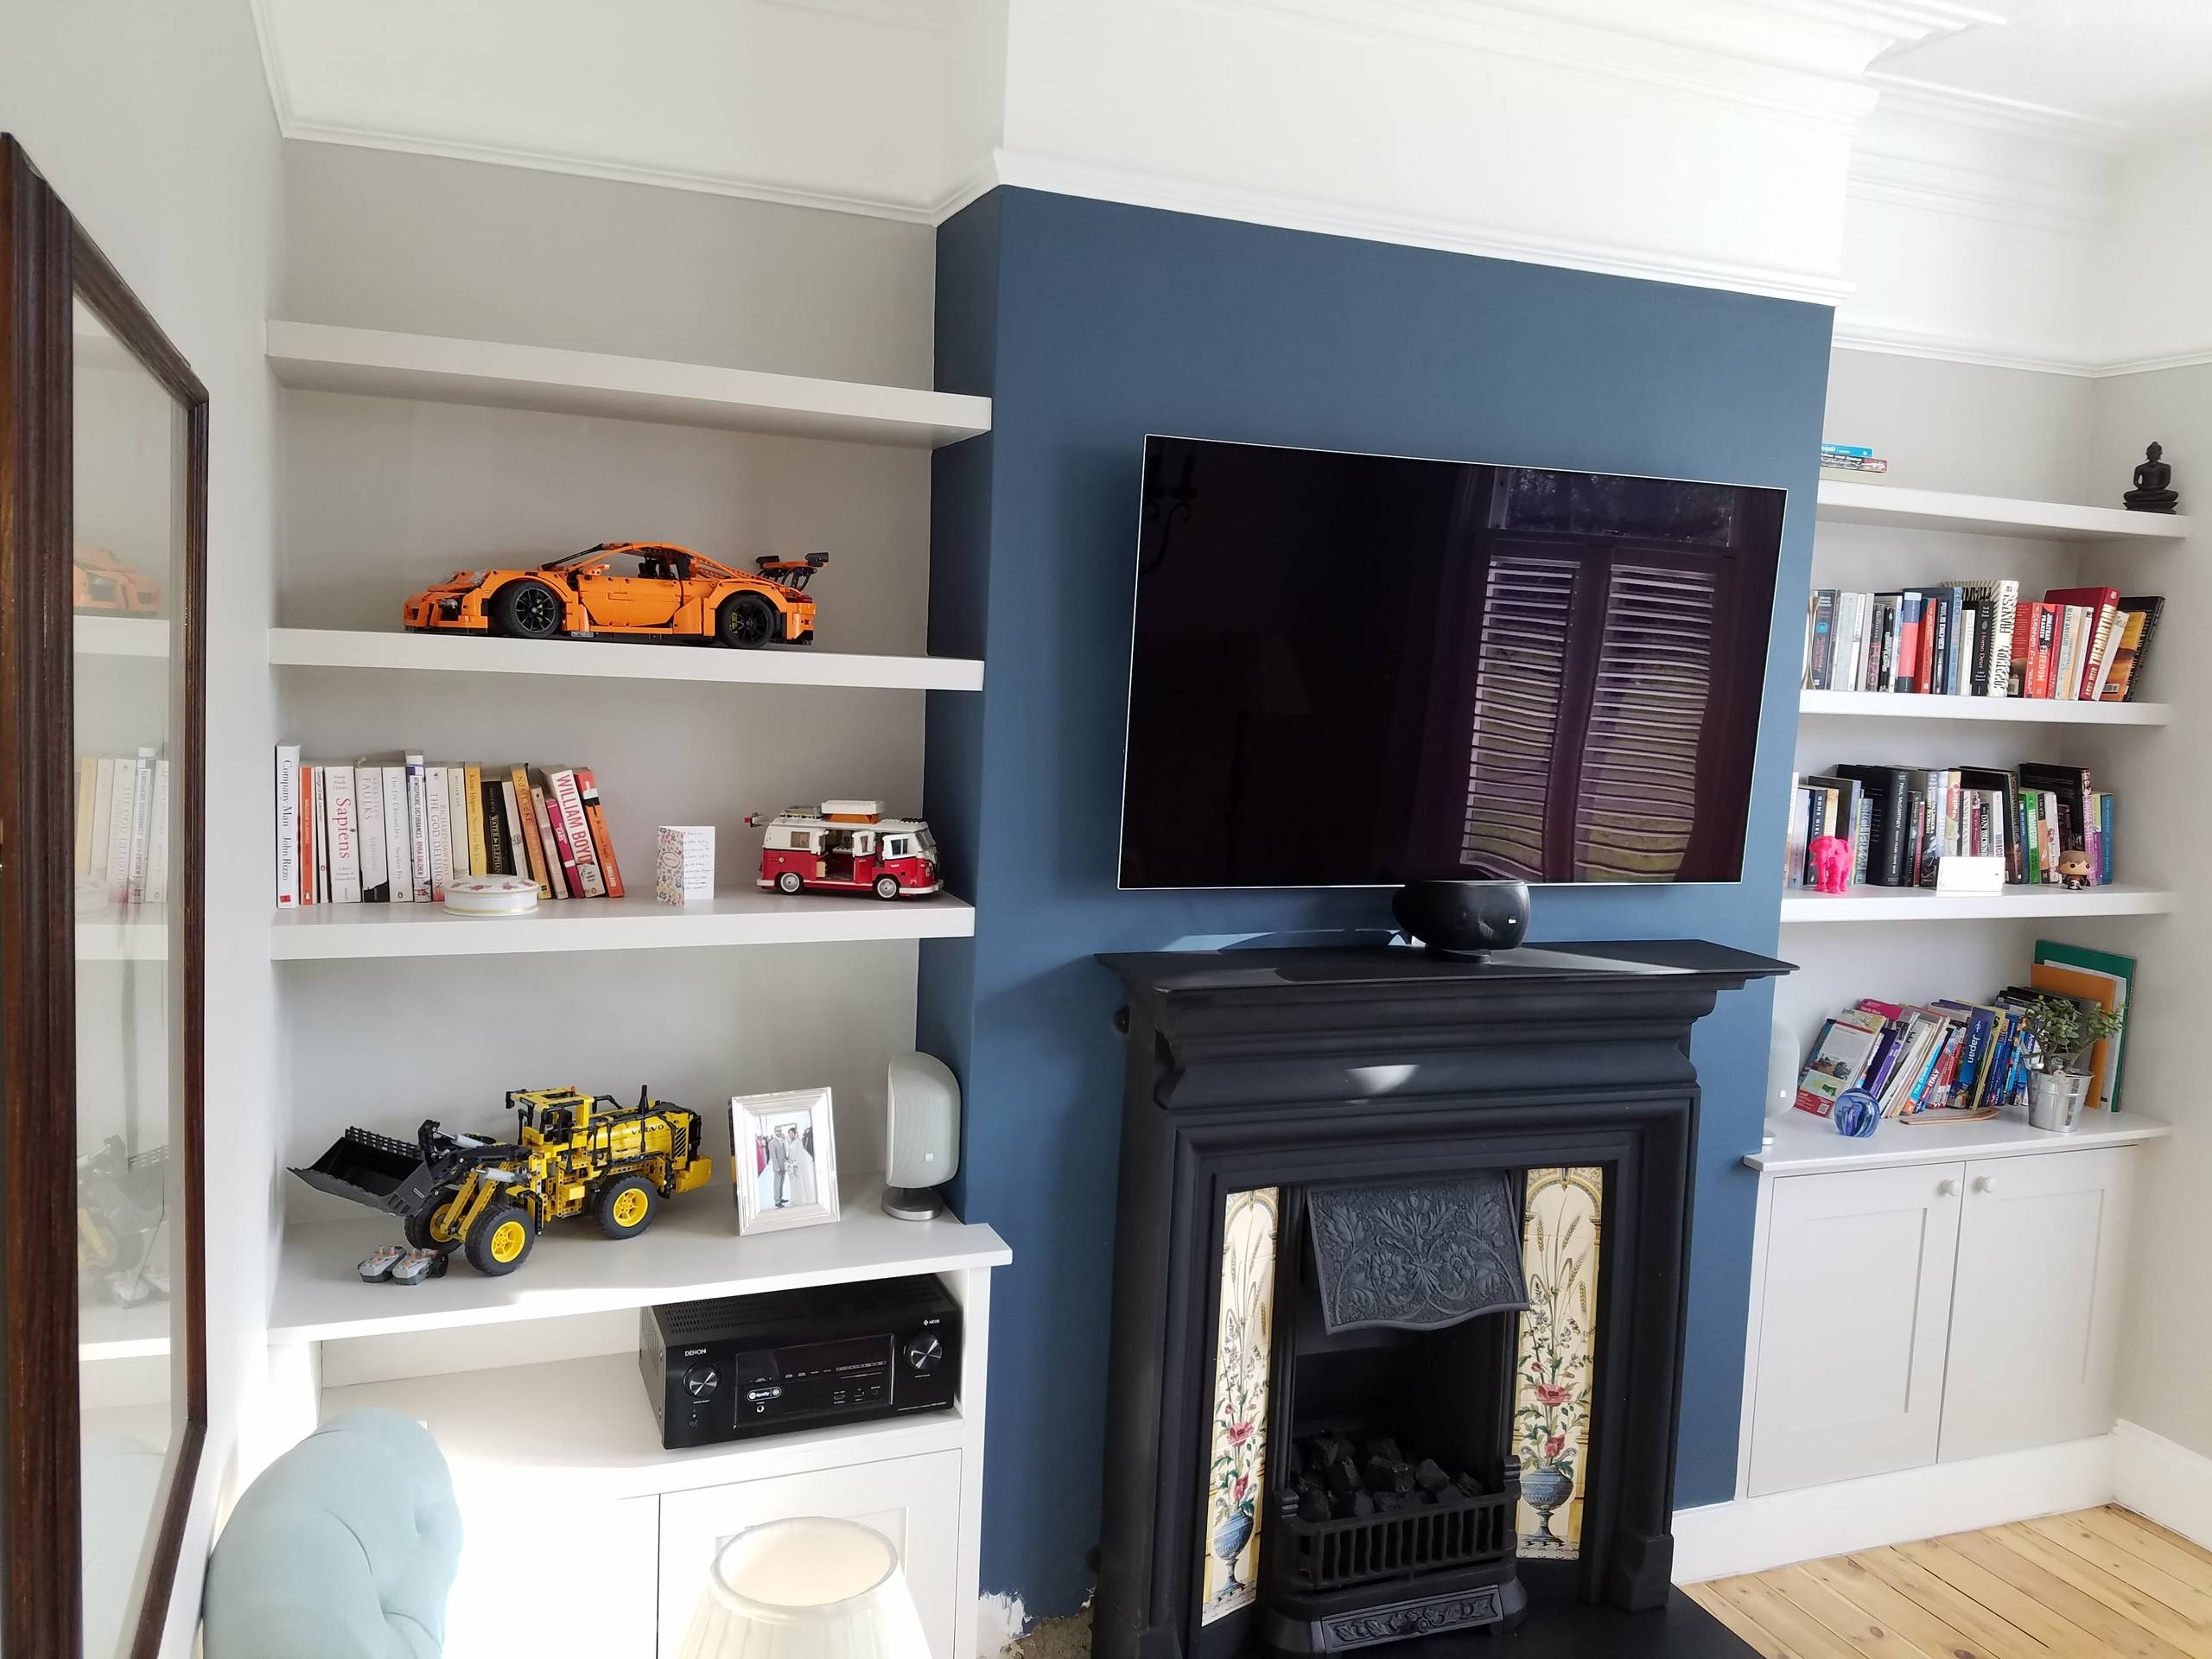 Alcove bookcases and  cupboards